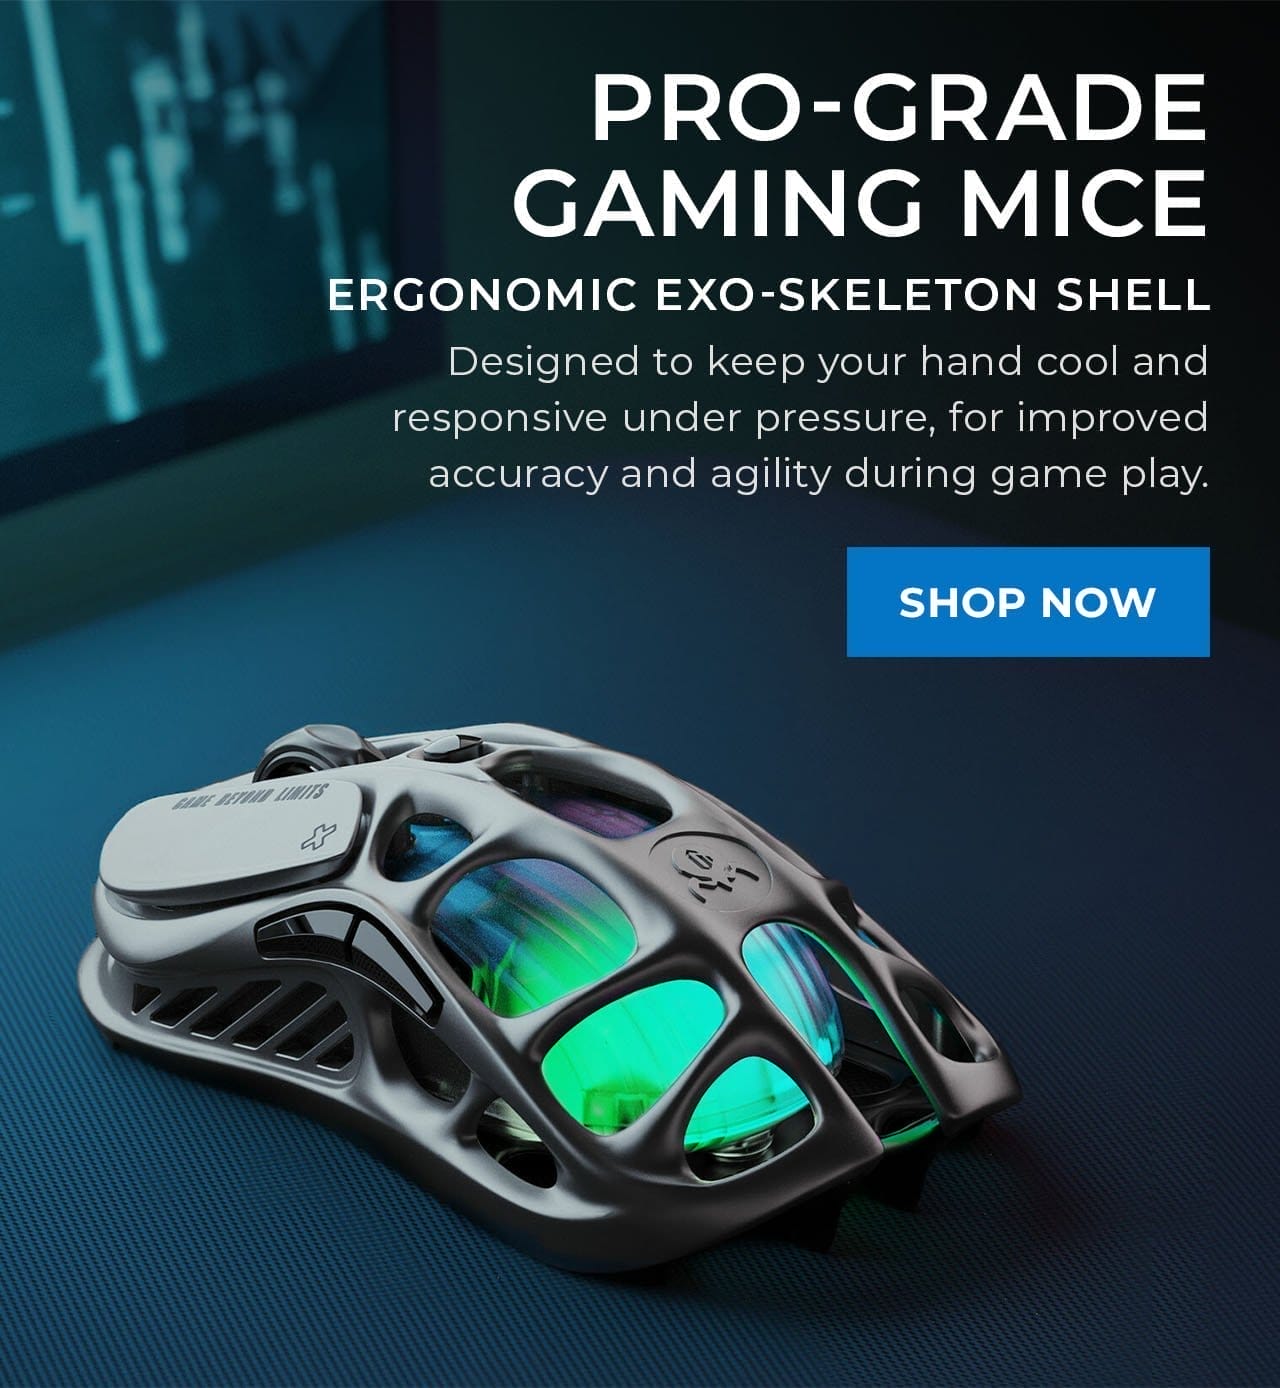 Pro-Grade Gaming Mice | SHOP NOW